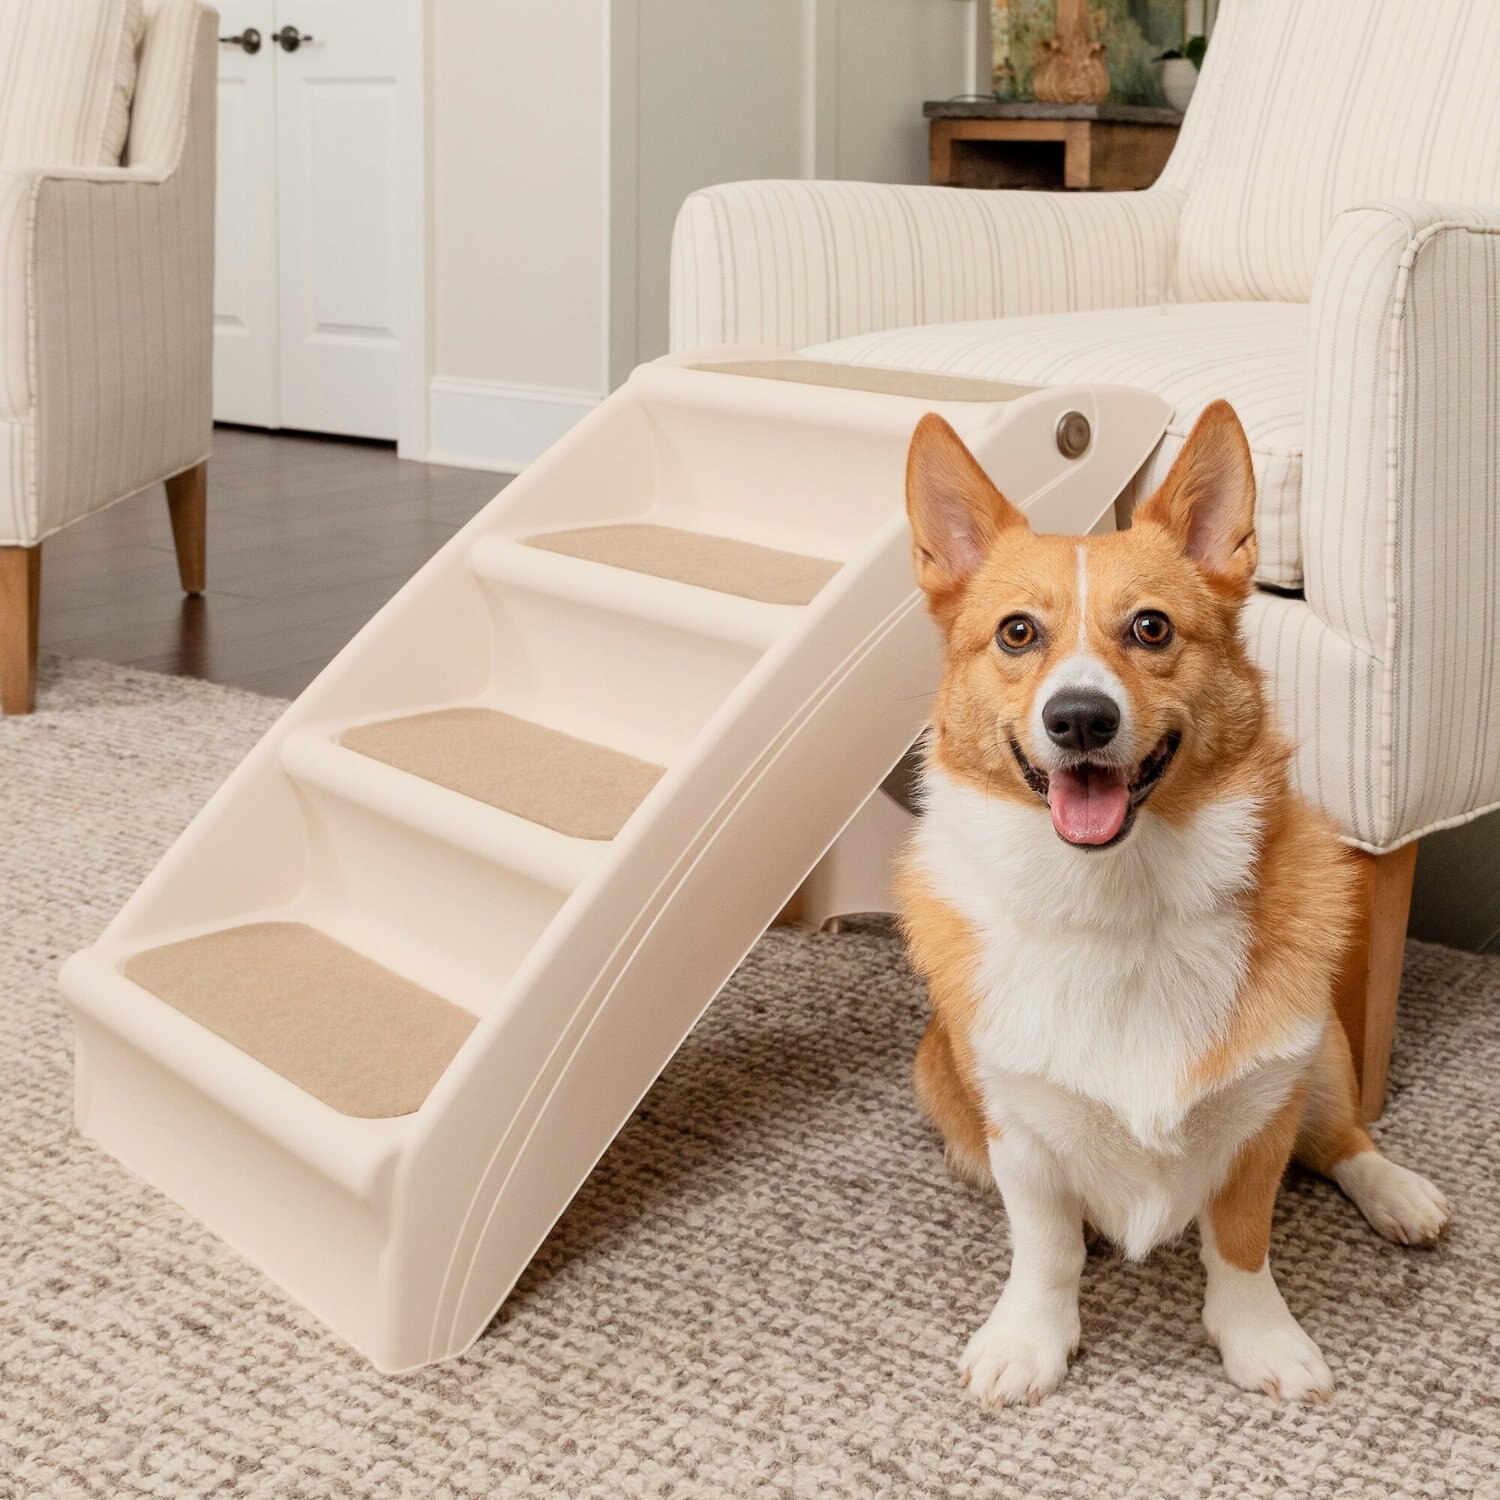 Kphico High Density Foam Dog Ladder Stairs,4-Step Extra Wide Deep Pet Steps,Non-Slip Ladder Stairs for Older Dogs,Injured Pets-Send A pet Hair Remover Roller 